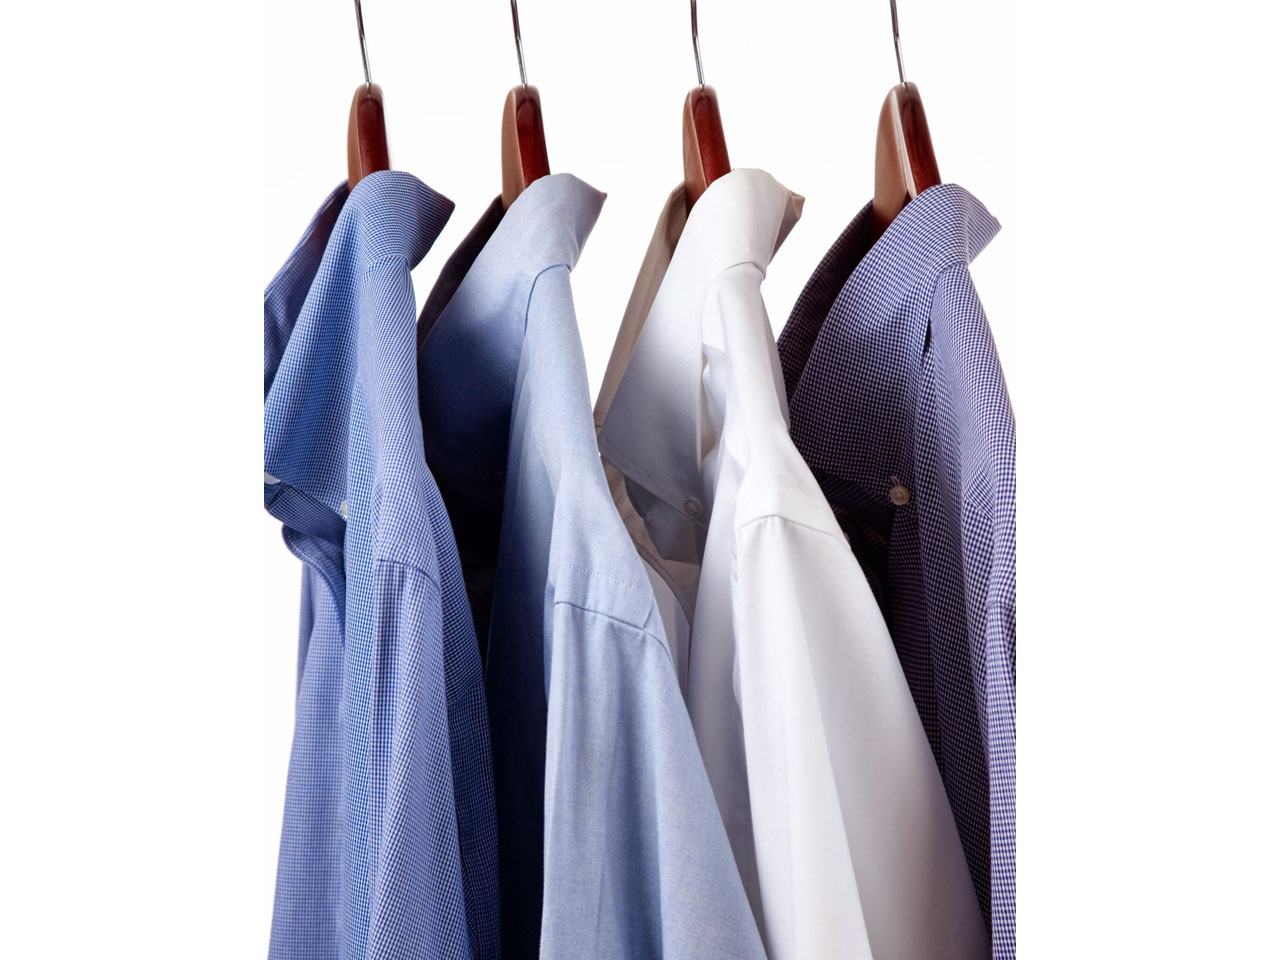 DRY-CLEANING NOVITET Dry-cleaning Beograd